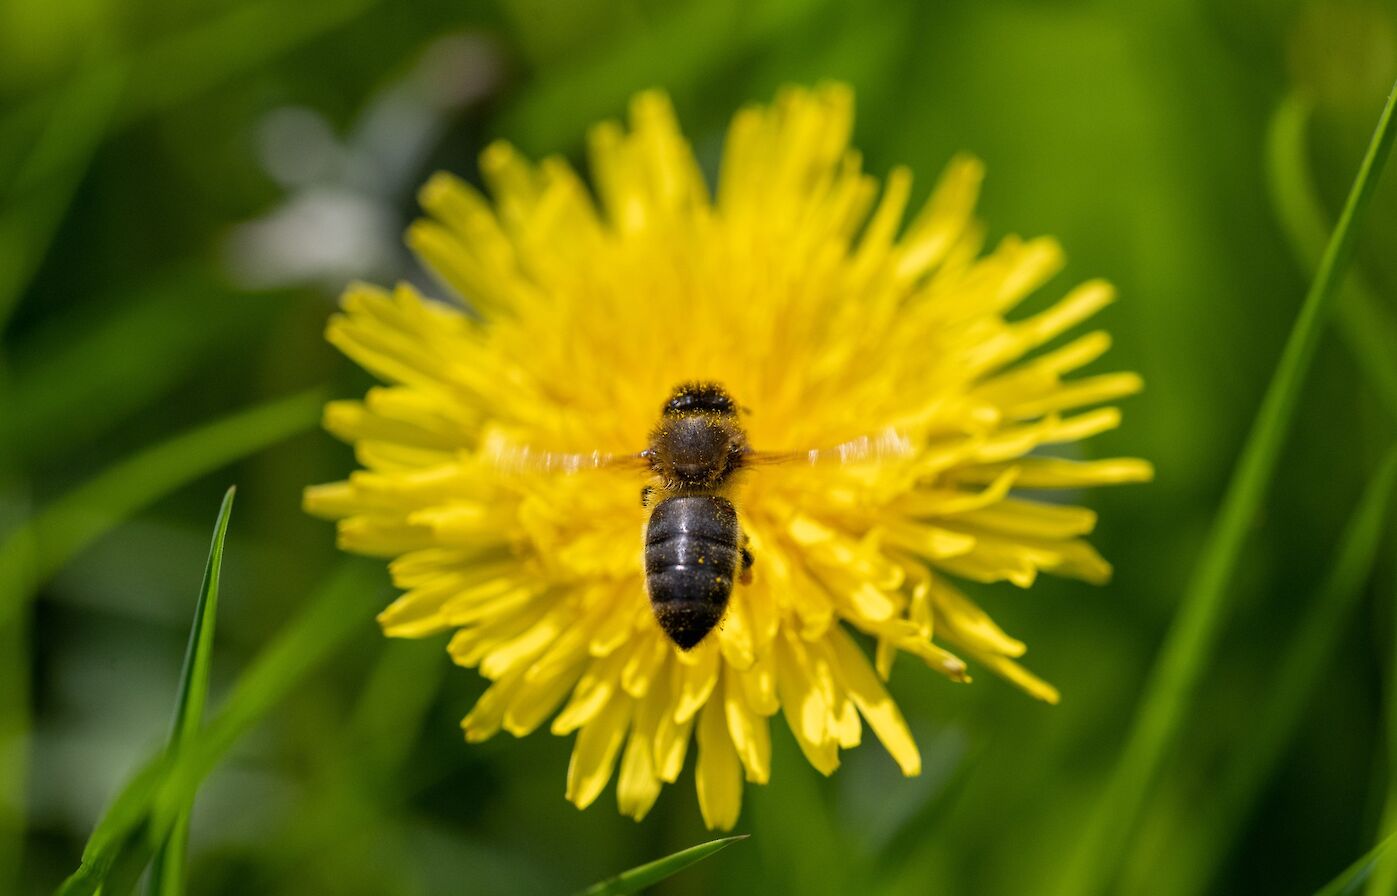 Dandelion head with bee - image by Raymond Besant